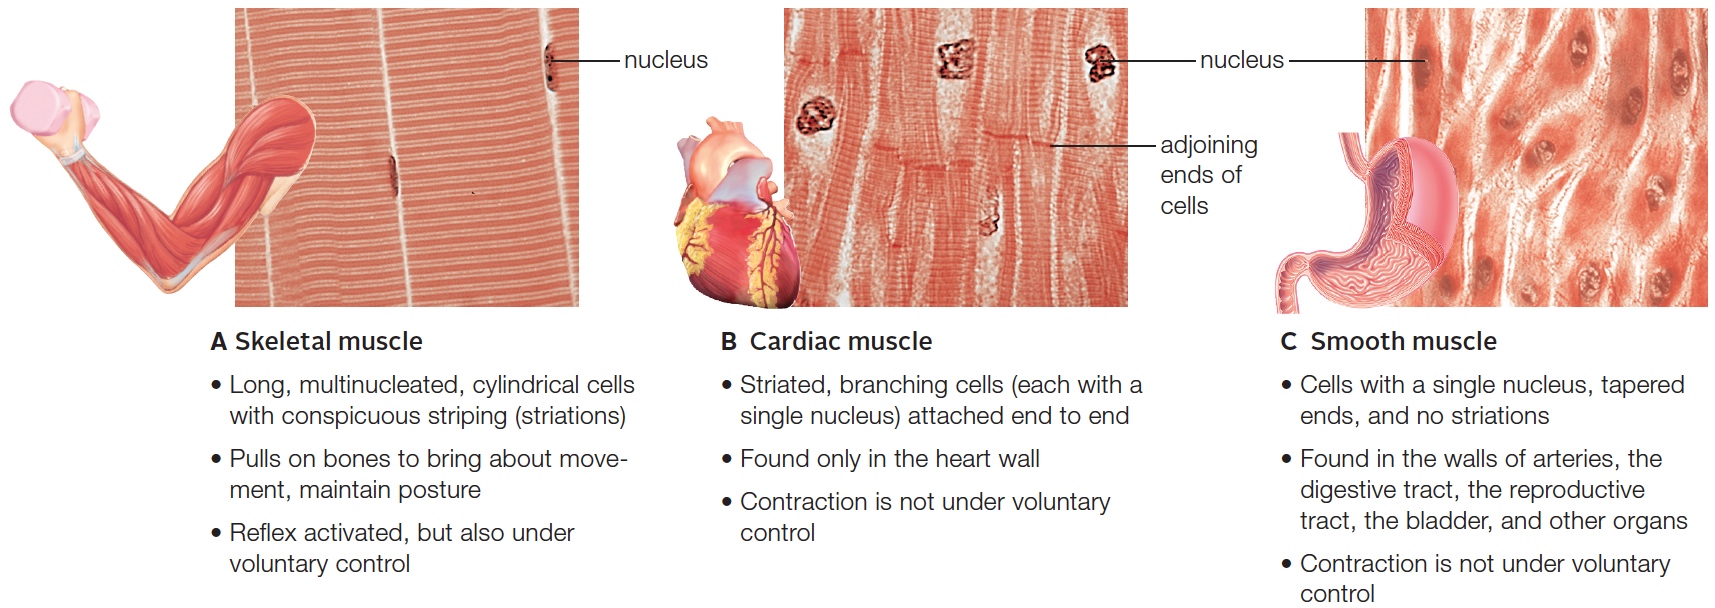 Three types of muscle tissue